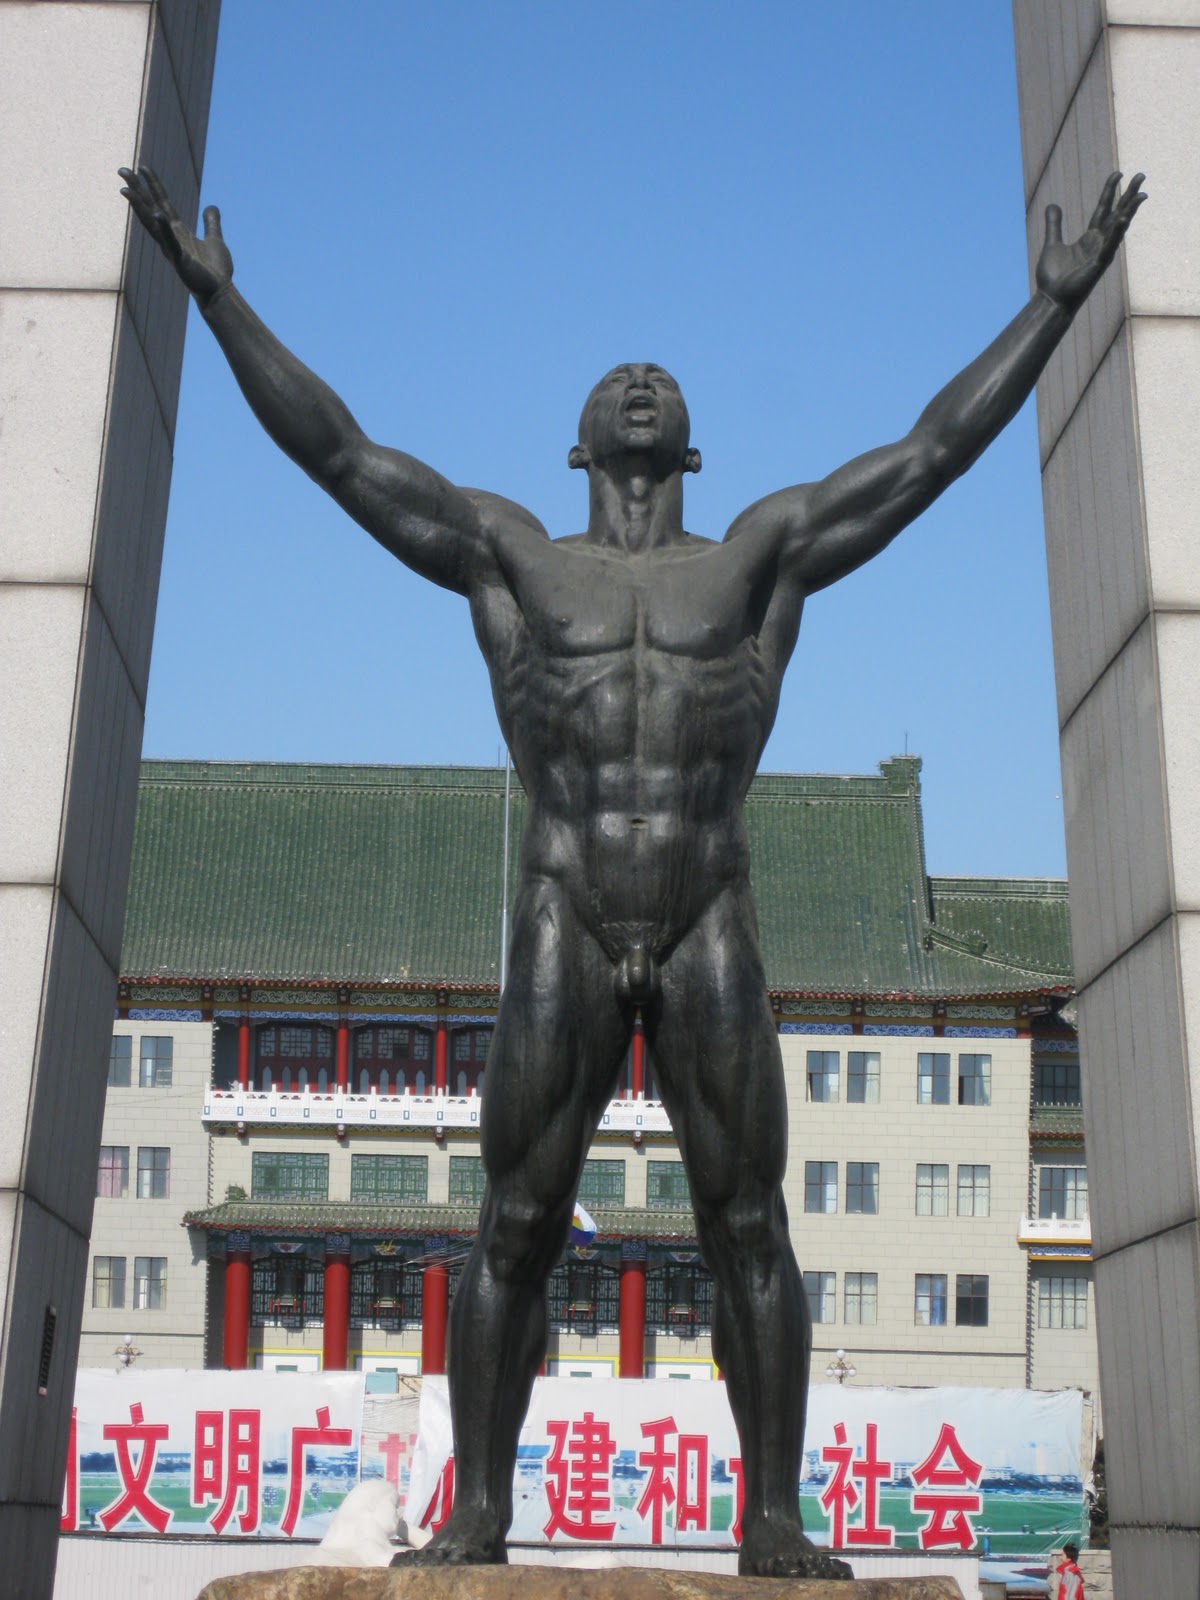 You porn site in Changchun